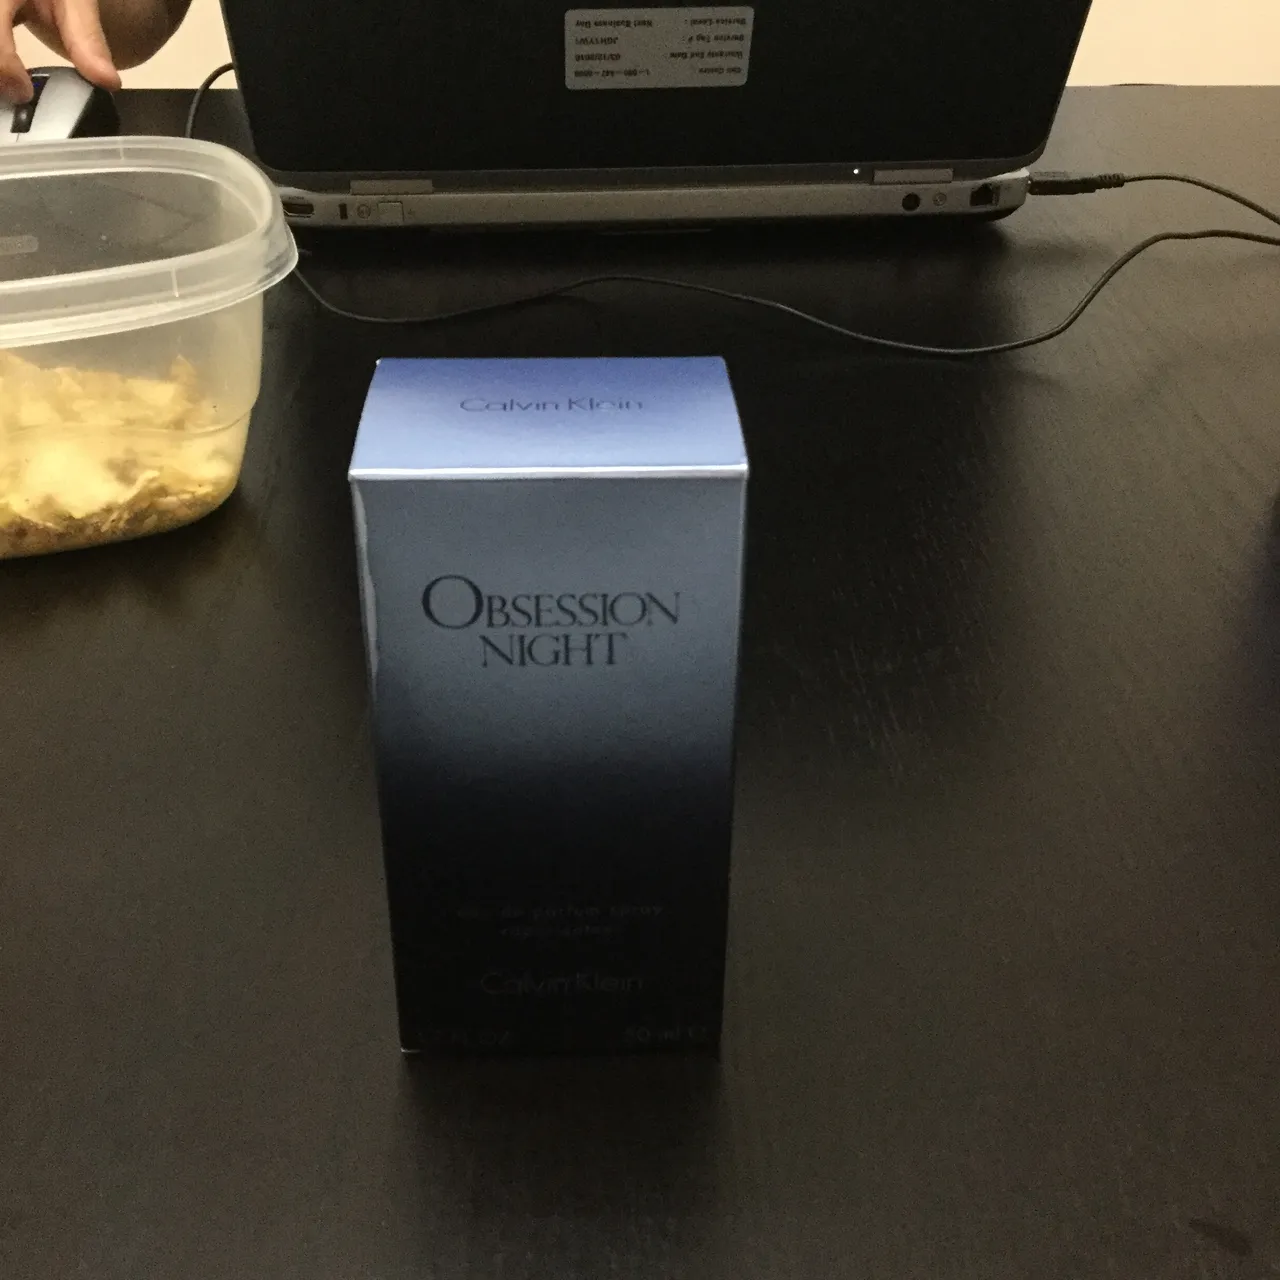 Obsession night by Calvin Klein (perfume for women) photo 1